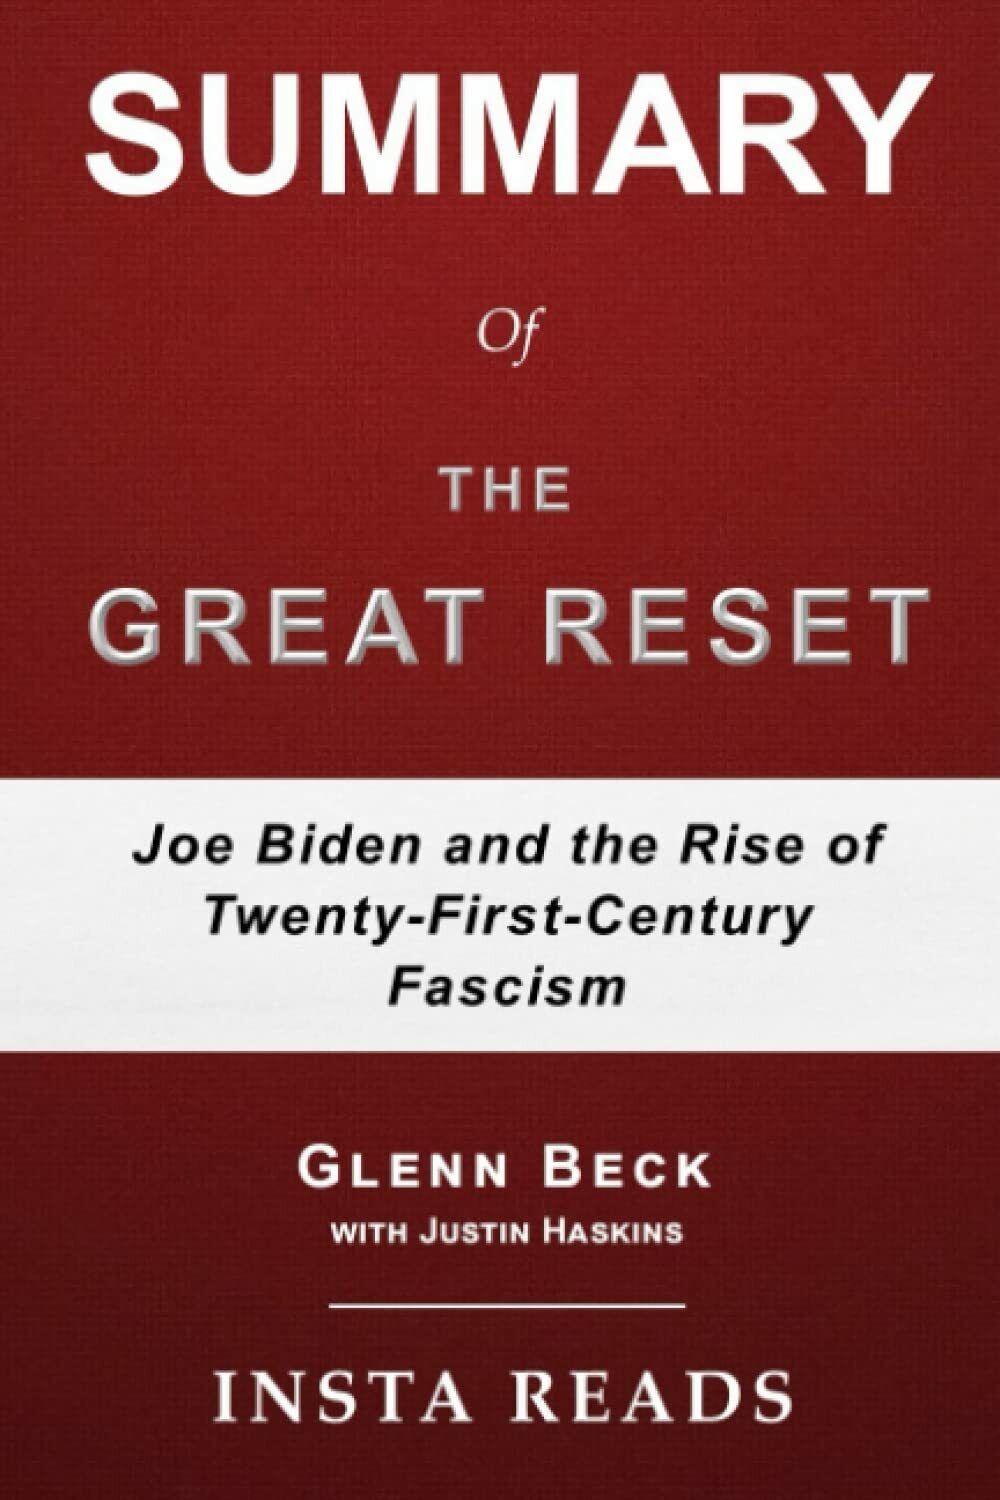 Summary of The Great Reset by Glenn Beck and Justin Trask Haskins: Joe Biden and